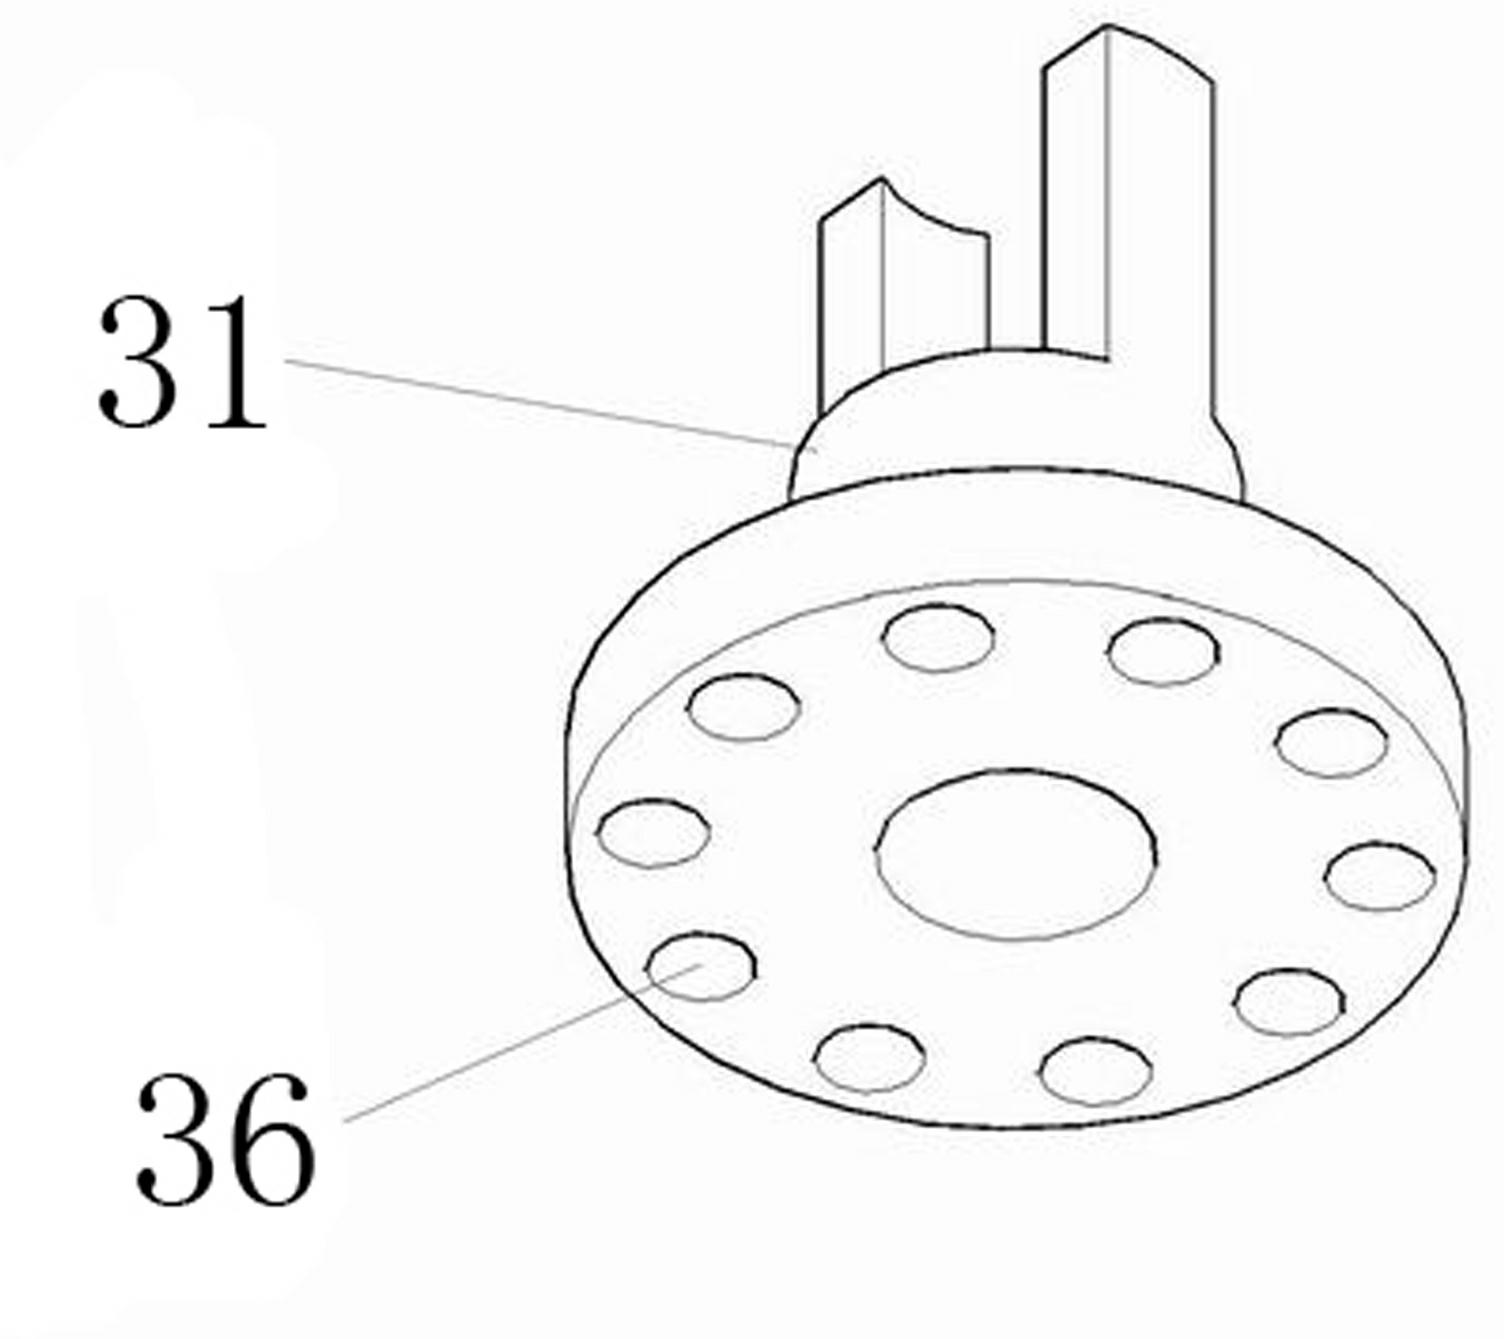 Coded lock cylinder with multiple drive plates